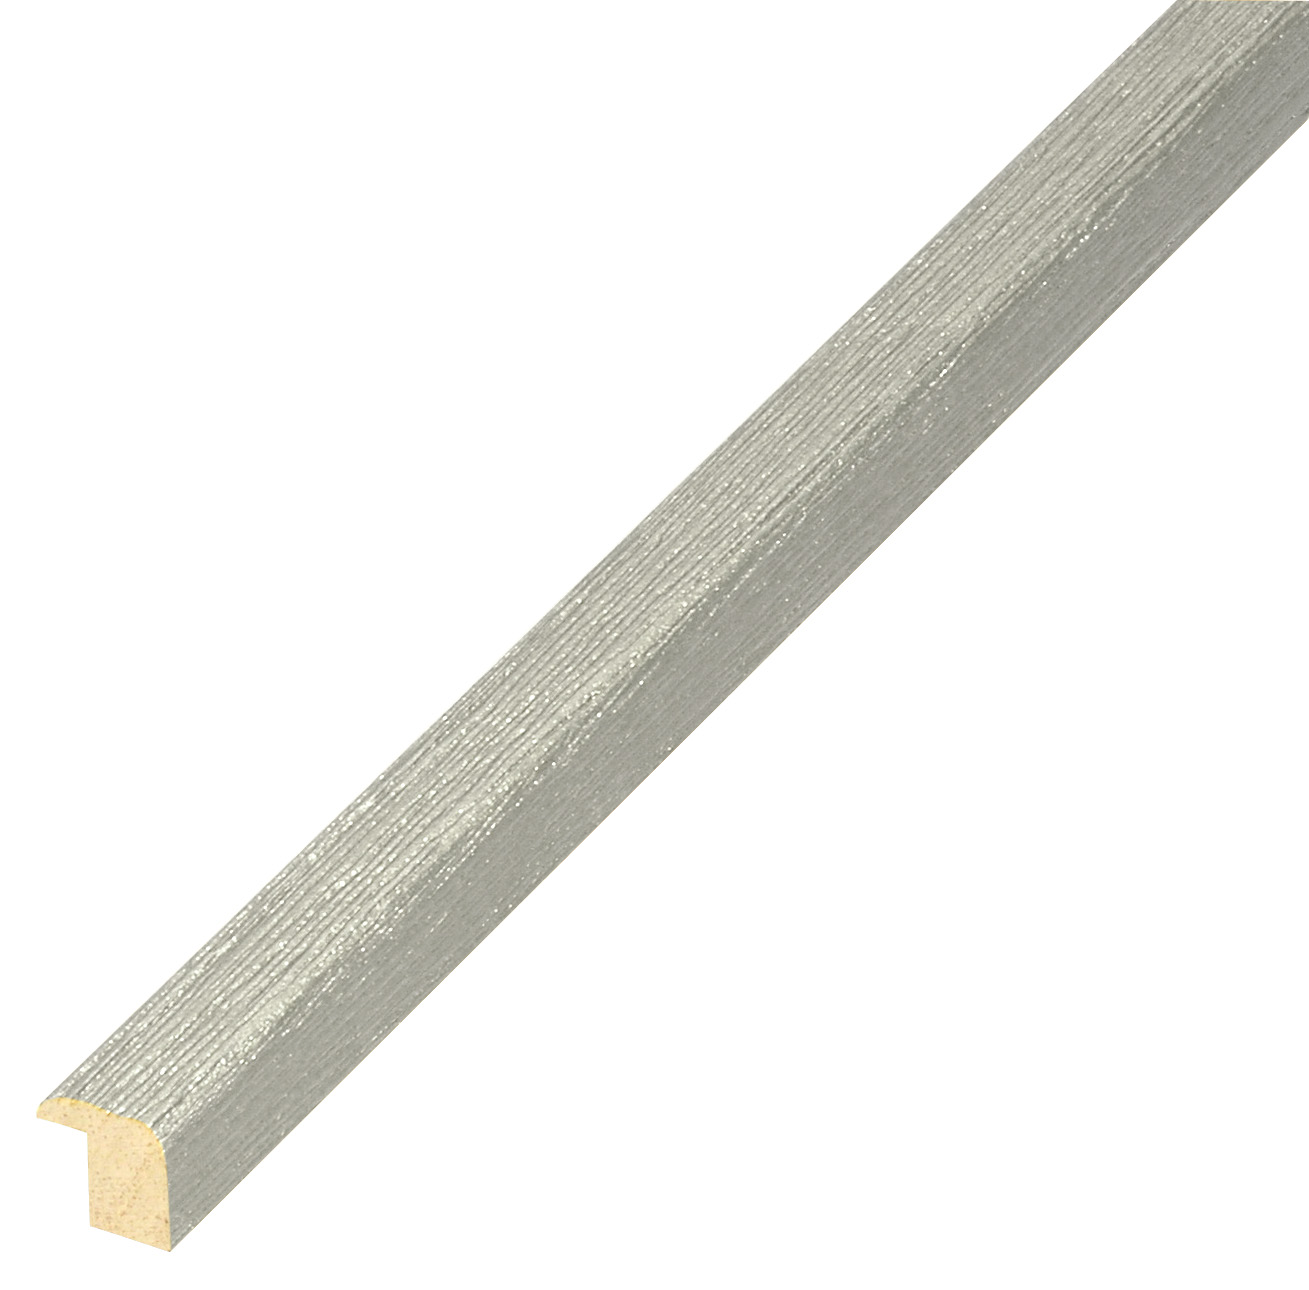 Moulding ayous woodworm treated mm 13x13 - scratched finish - silver - 311ARG